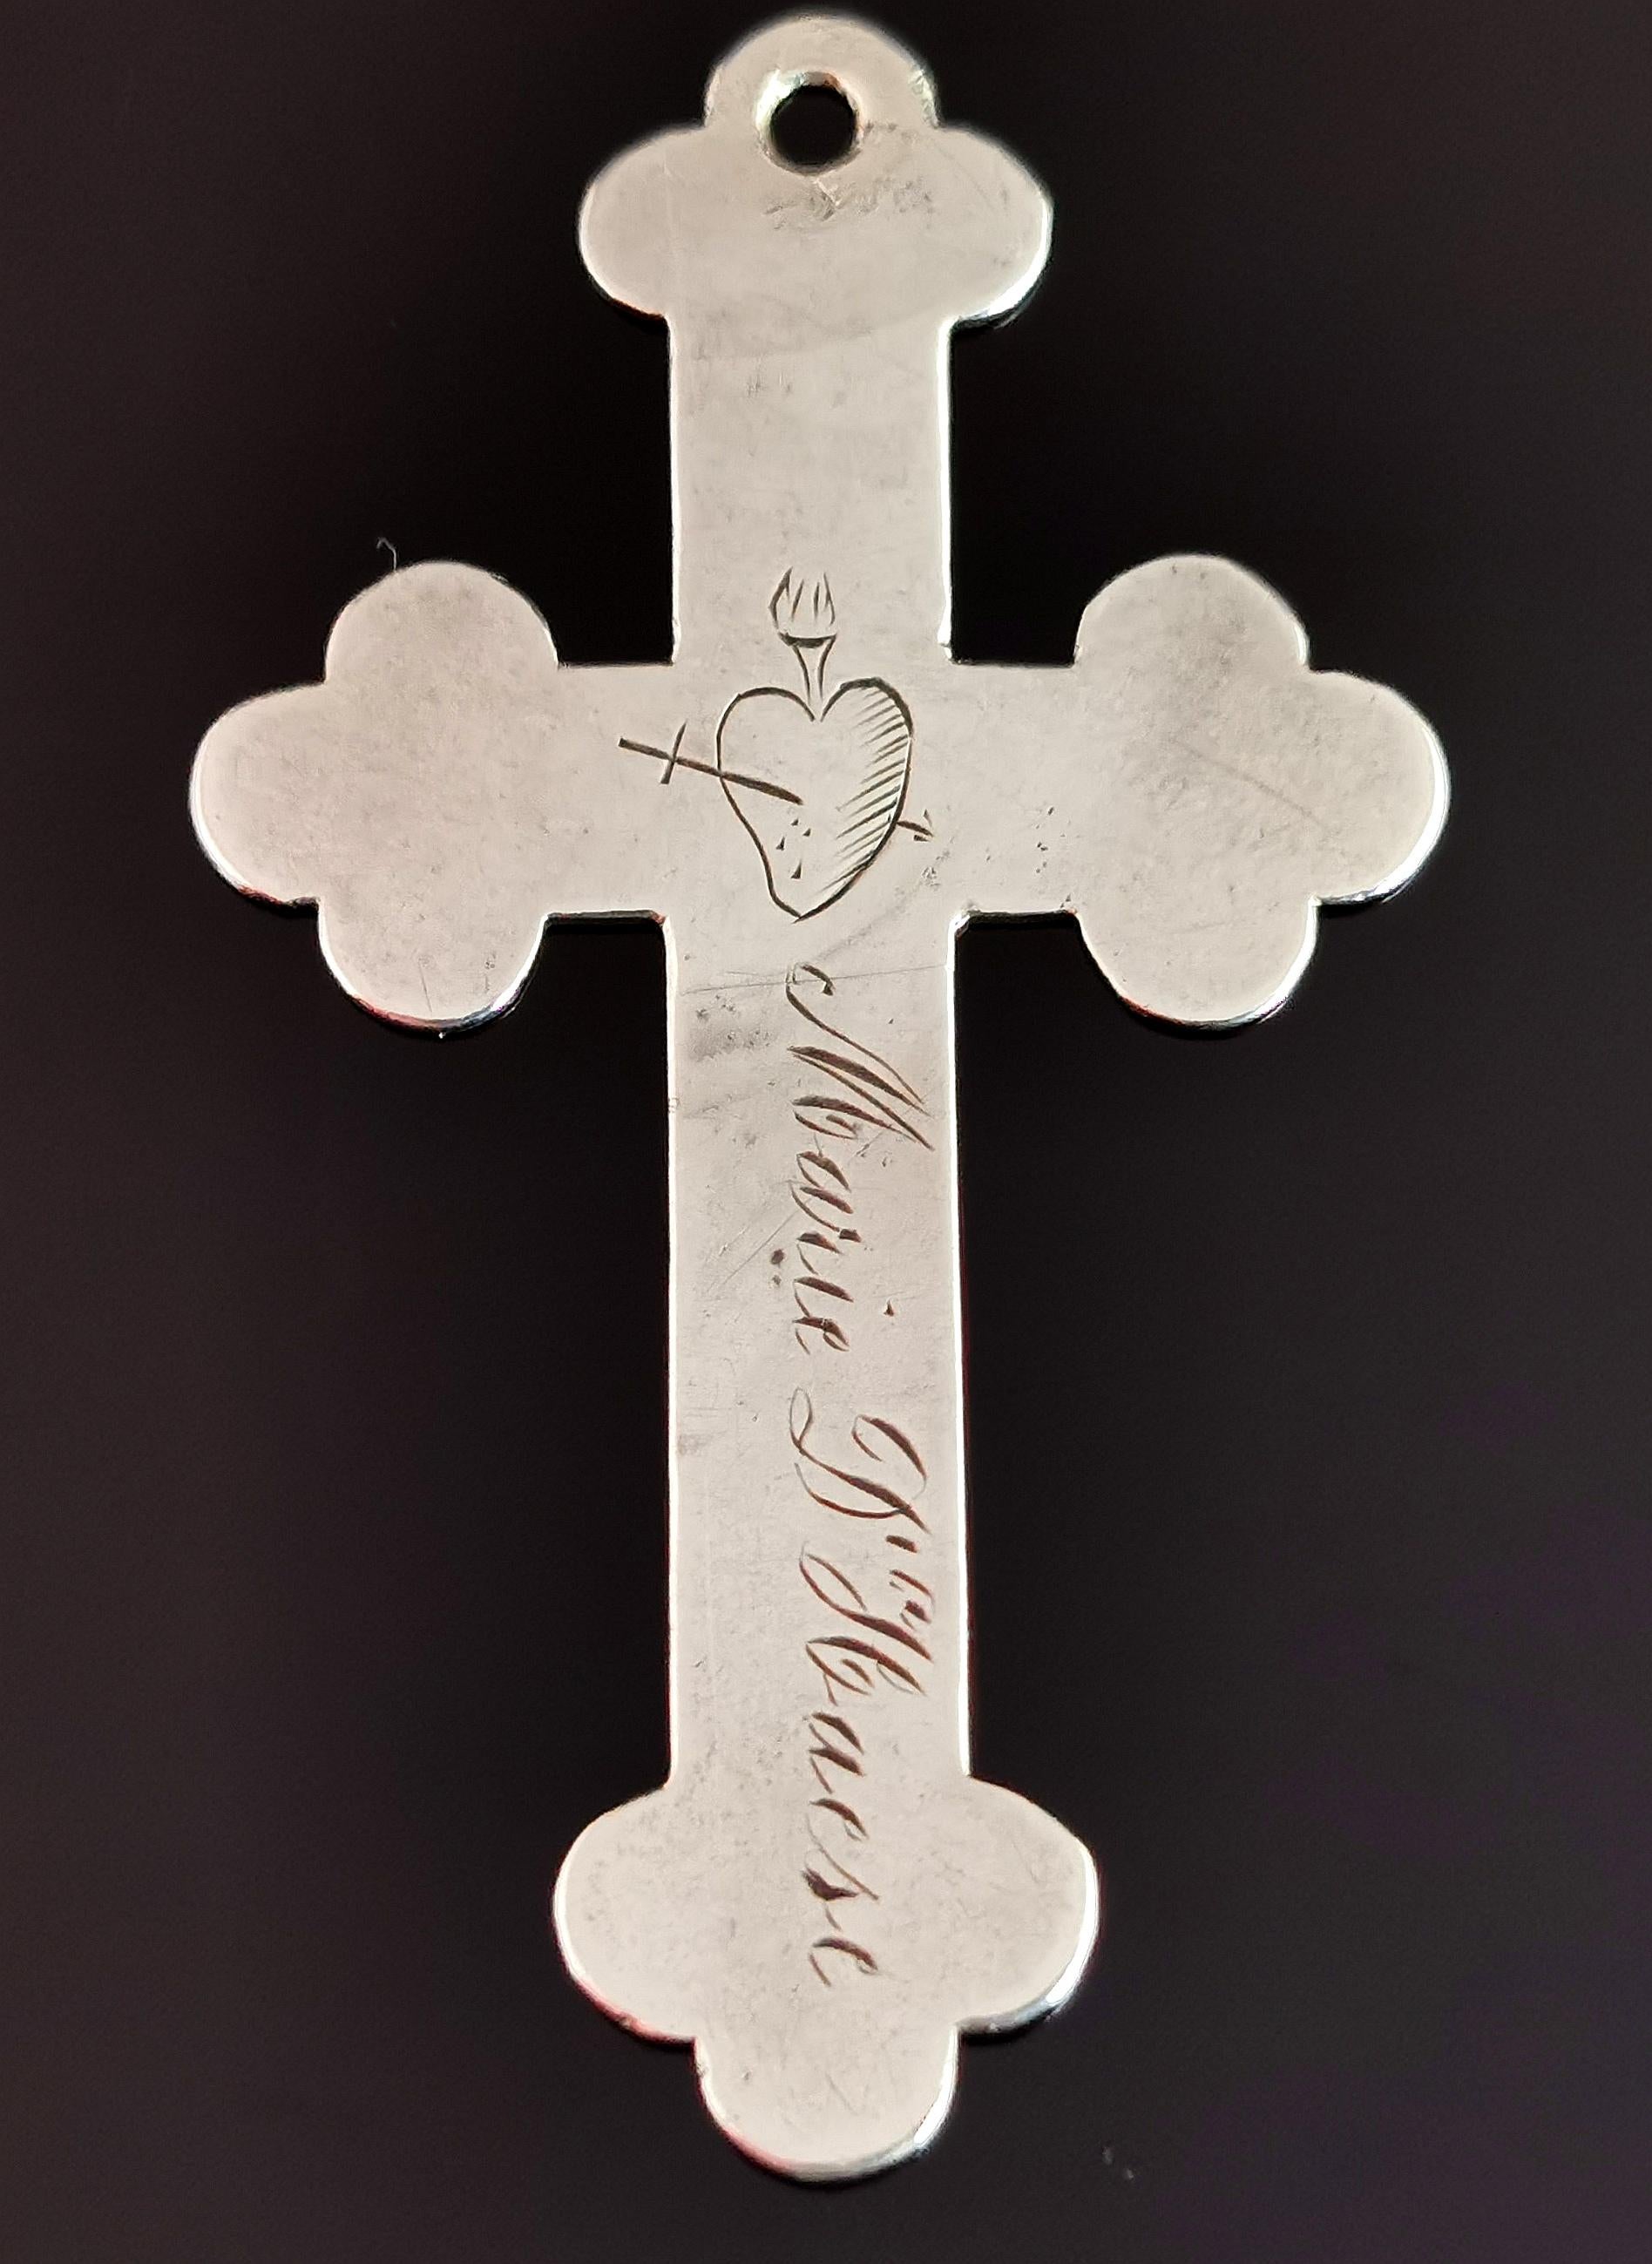 A beautiful and unusual antique sterling silver Cross pendant.

A fairly large sized cross with decorative rounded edges, it is lightweight and quite slim.

The front of the cross is inscribed with a date of 2nd Feb 1907 and has a crowned heart